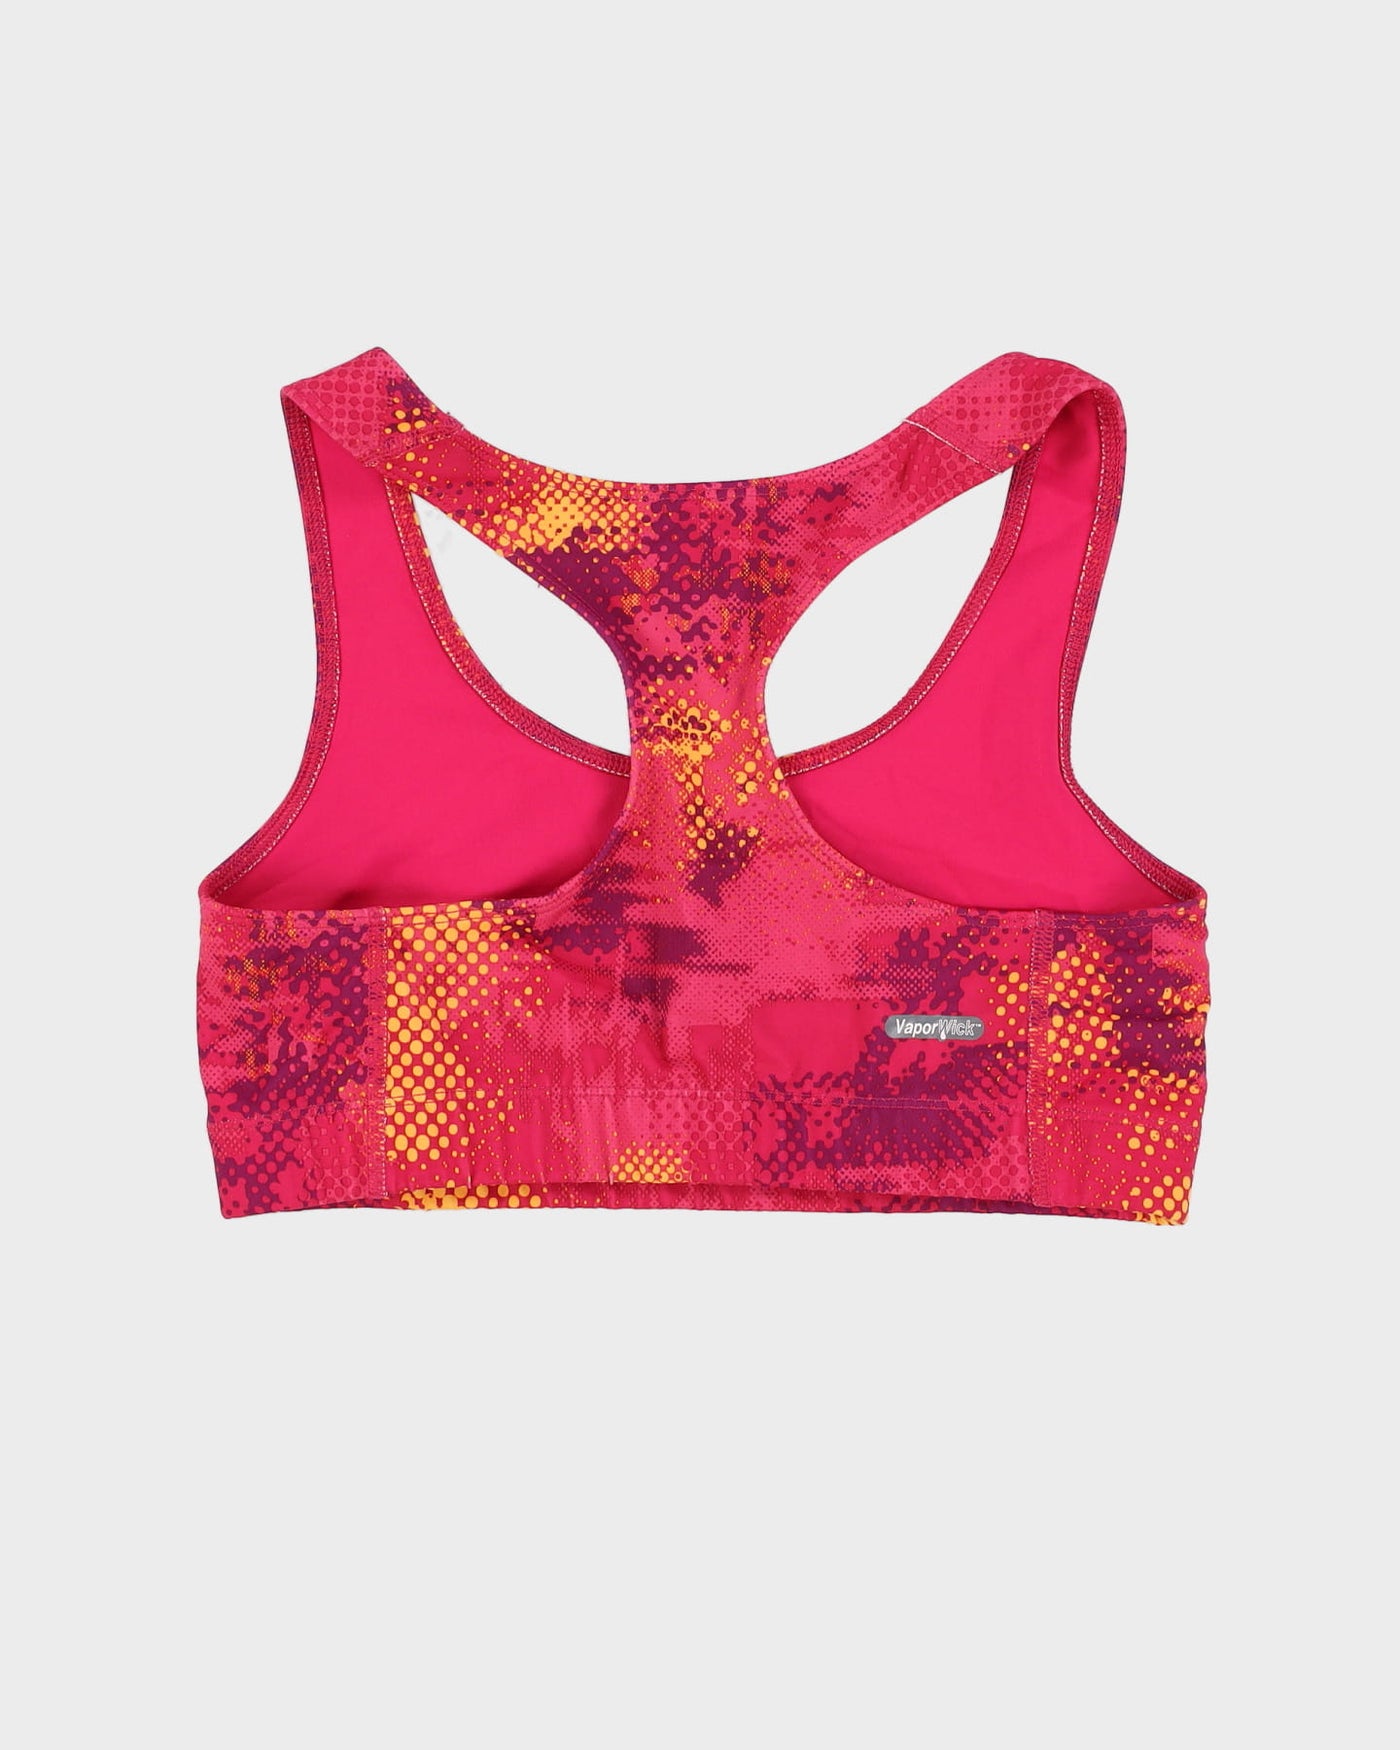 The North Face Pink Patterned Sports Bikini Top - S / M